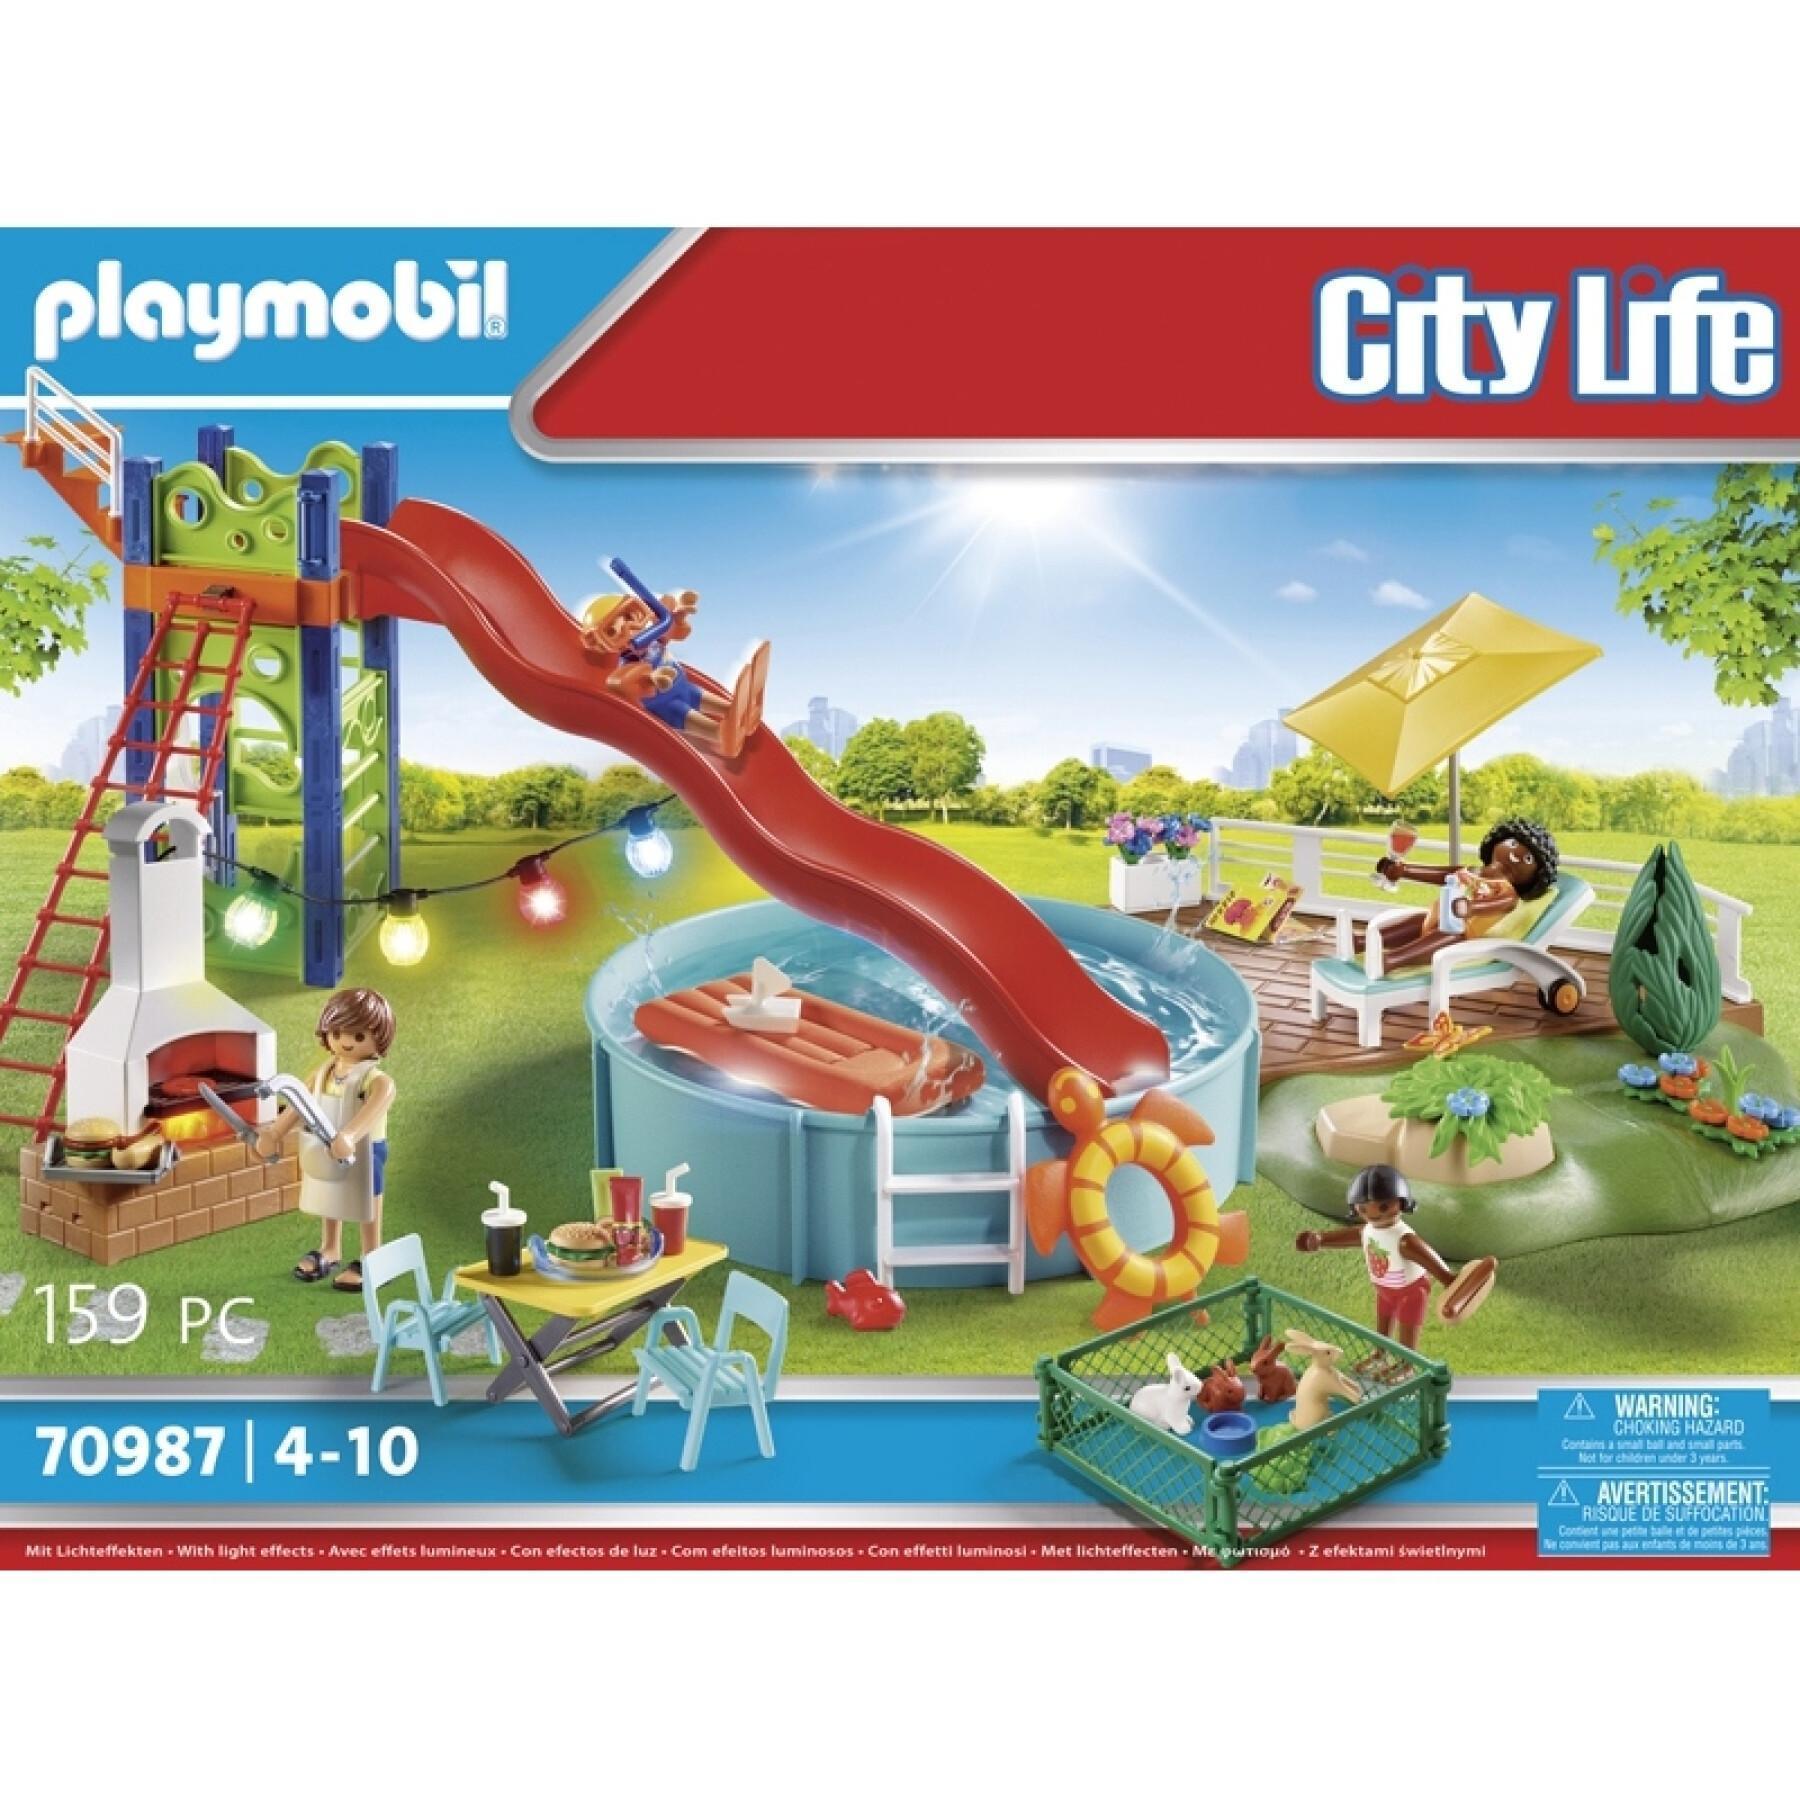 Figurine relaxation area with swimming pool Playmobil